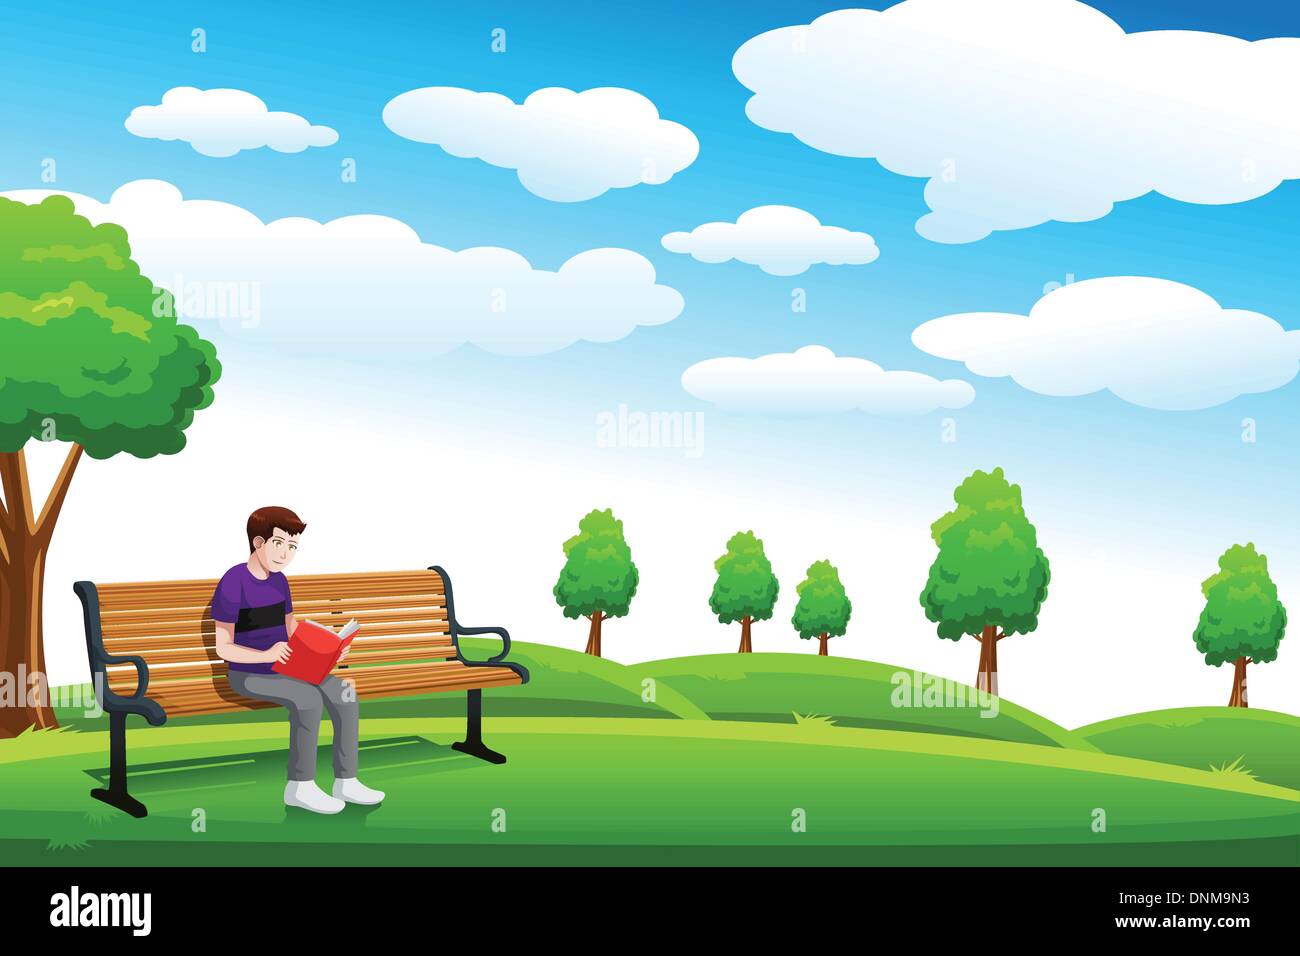 A vector illustration of a man reading a book in a park alone Stock Vector